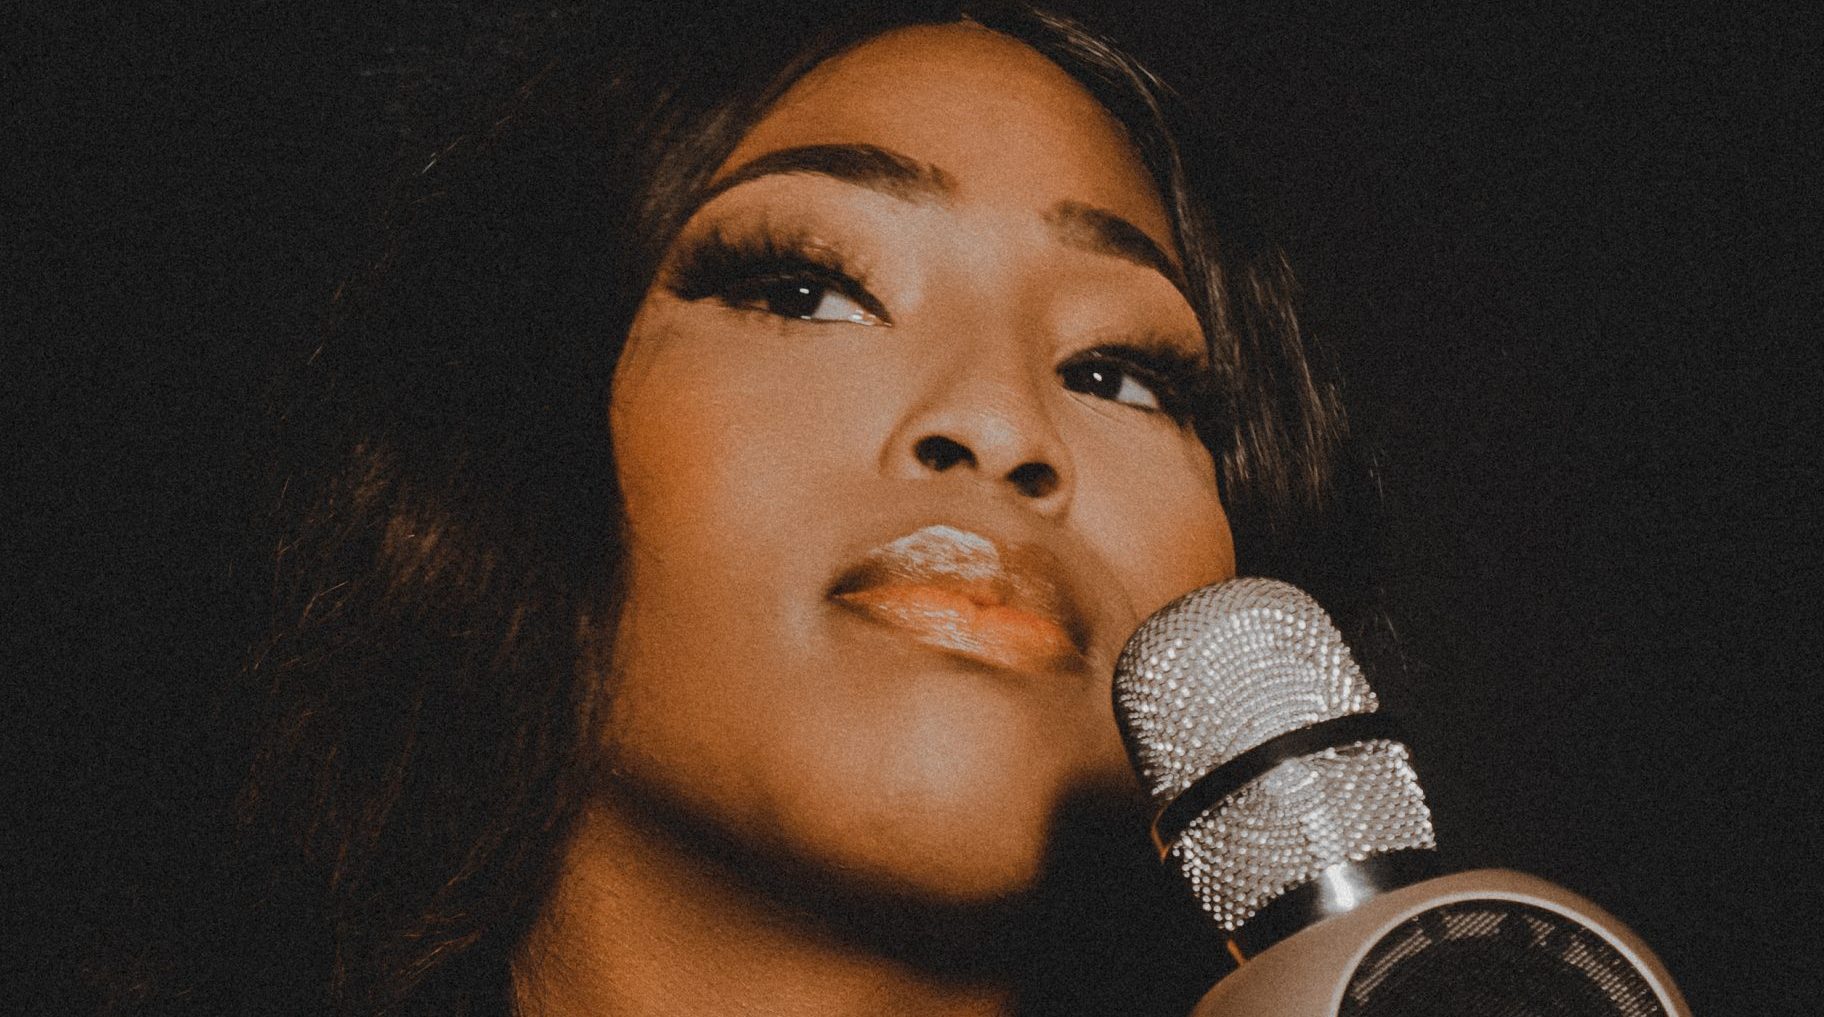 Listen to RnB Princess’s debut EP ‘Becoming’